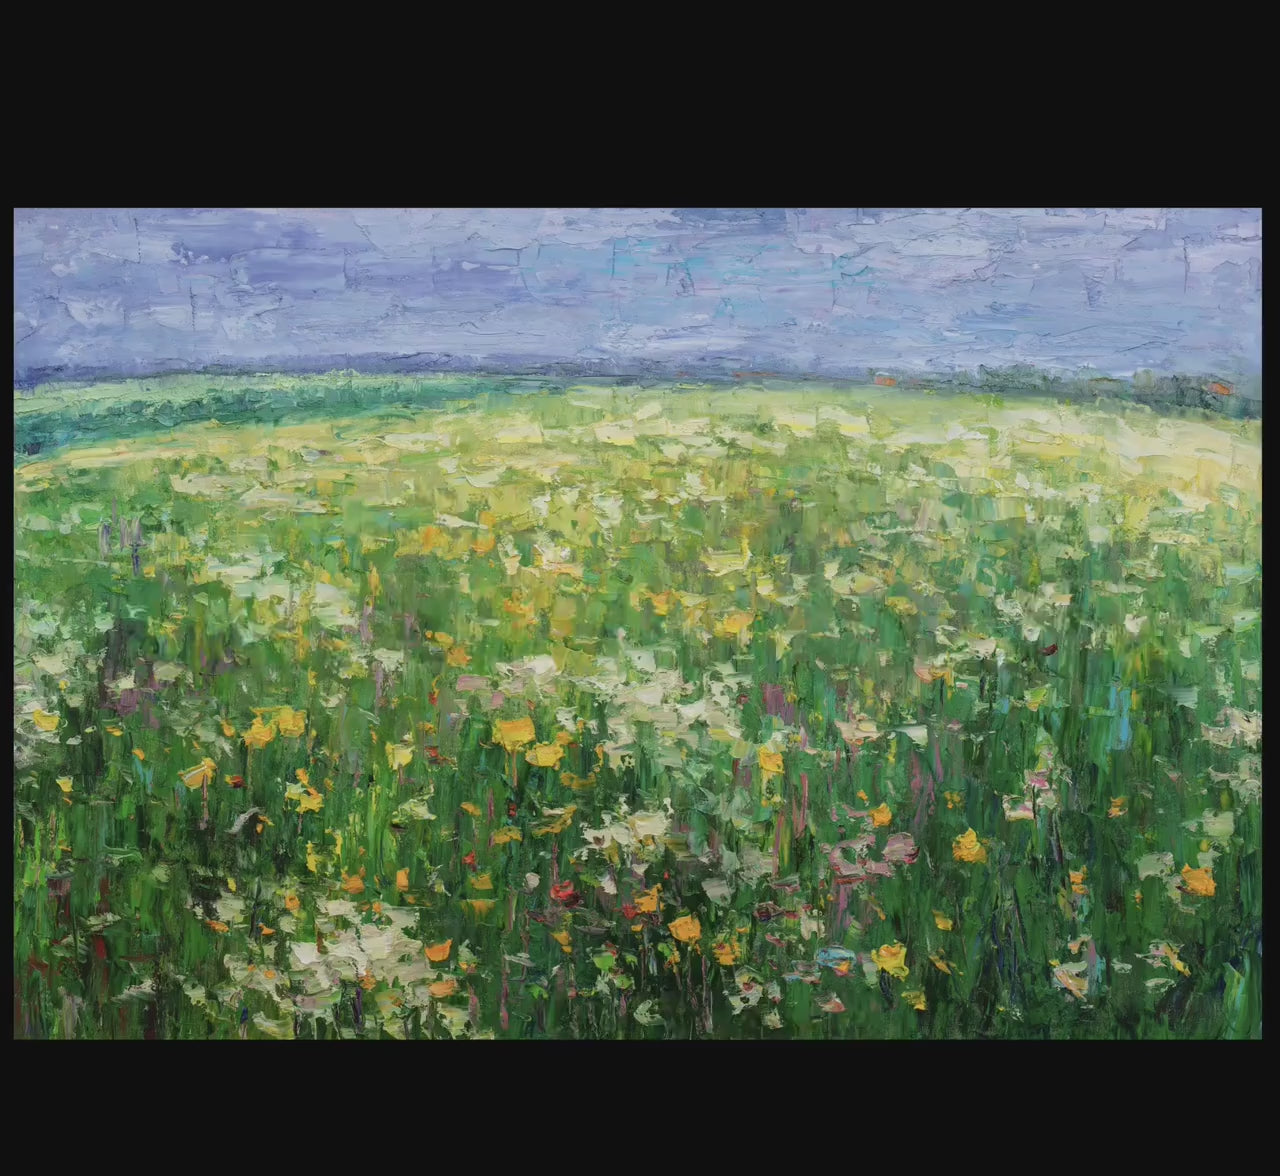 Oil Painting Spring Field With Wild Flowers, Fine Art, Oil On Canvas Painting, Landscape, Impasto Oil Painting, Oil Painting Original